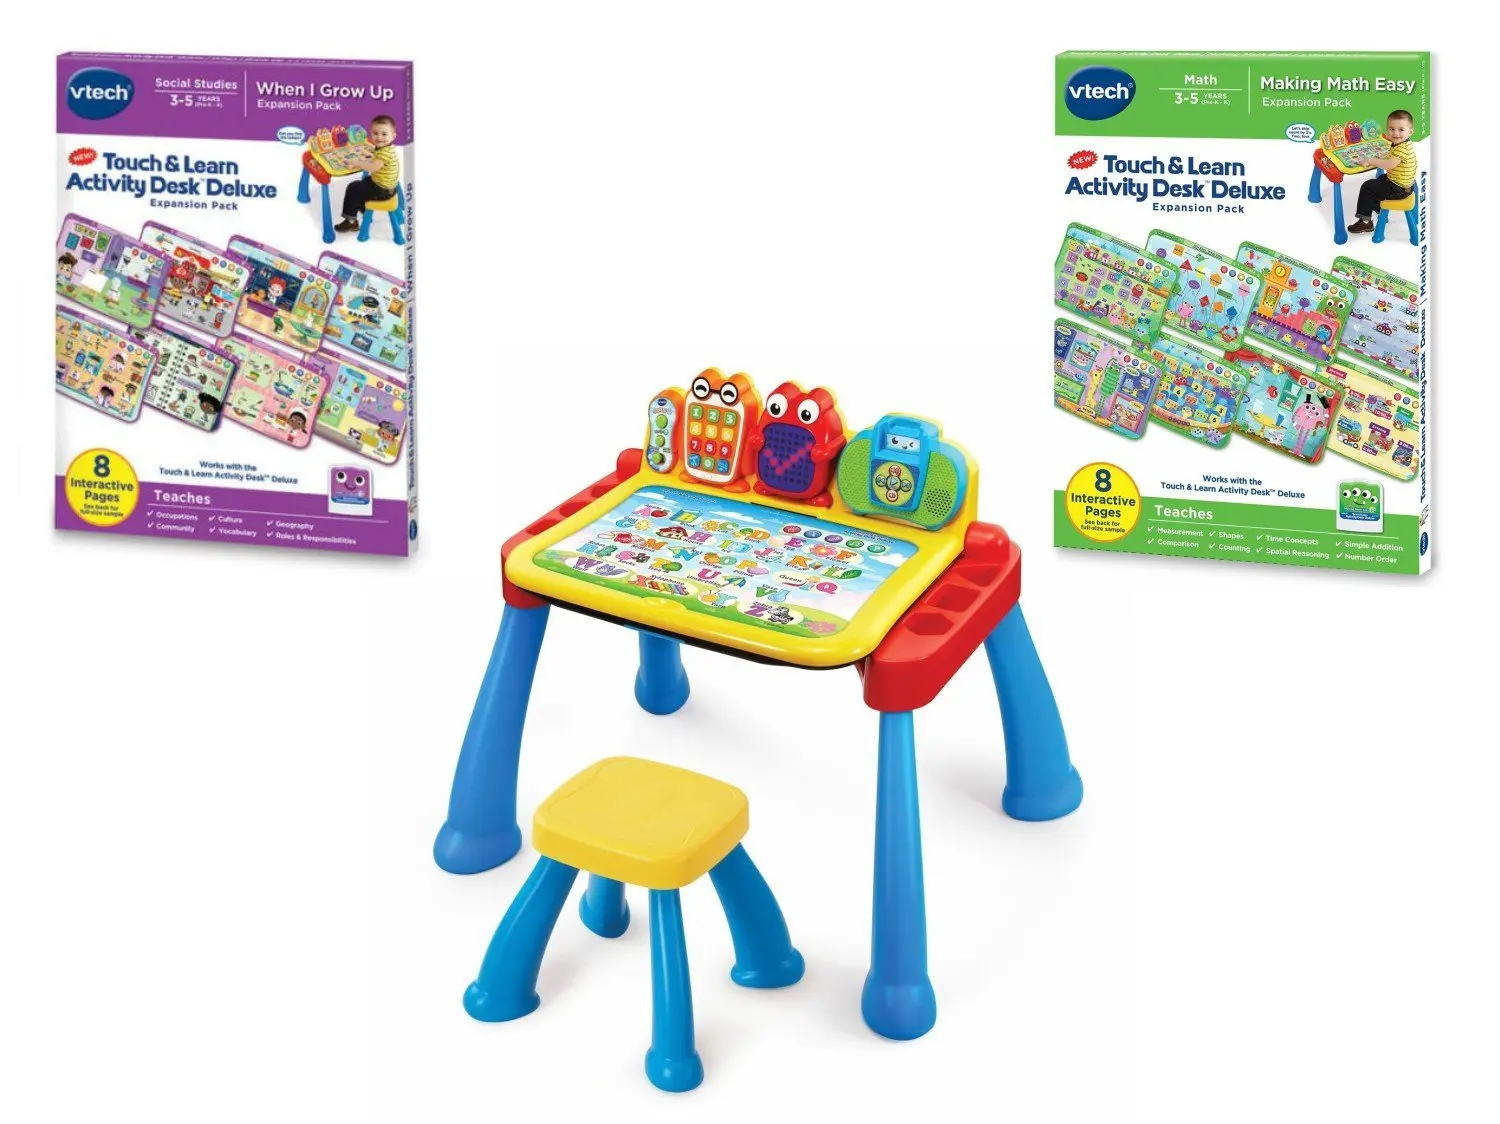 vtech touch and learn activity desk expansion pack bundle